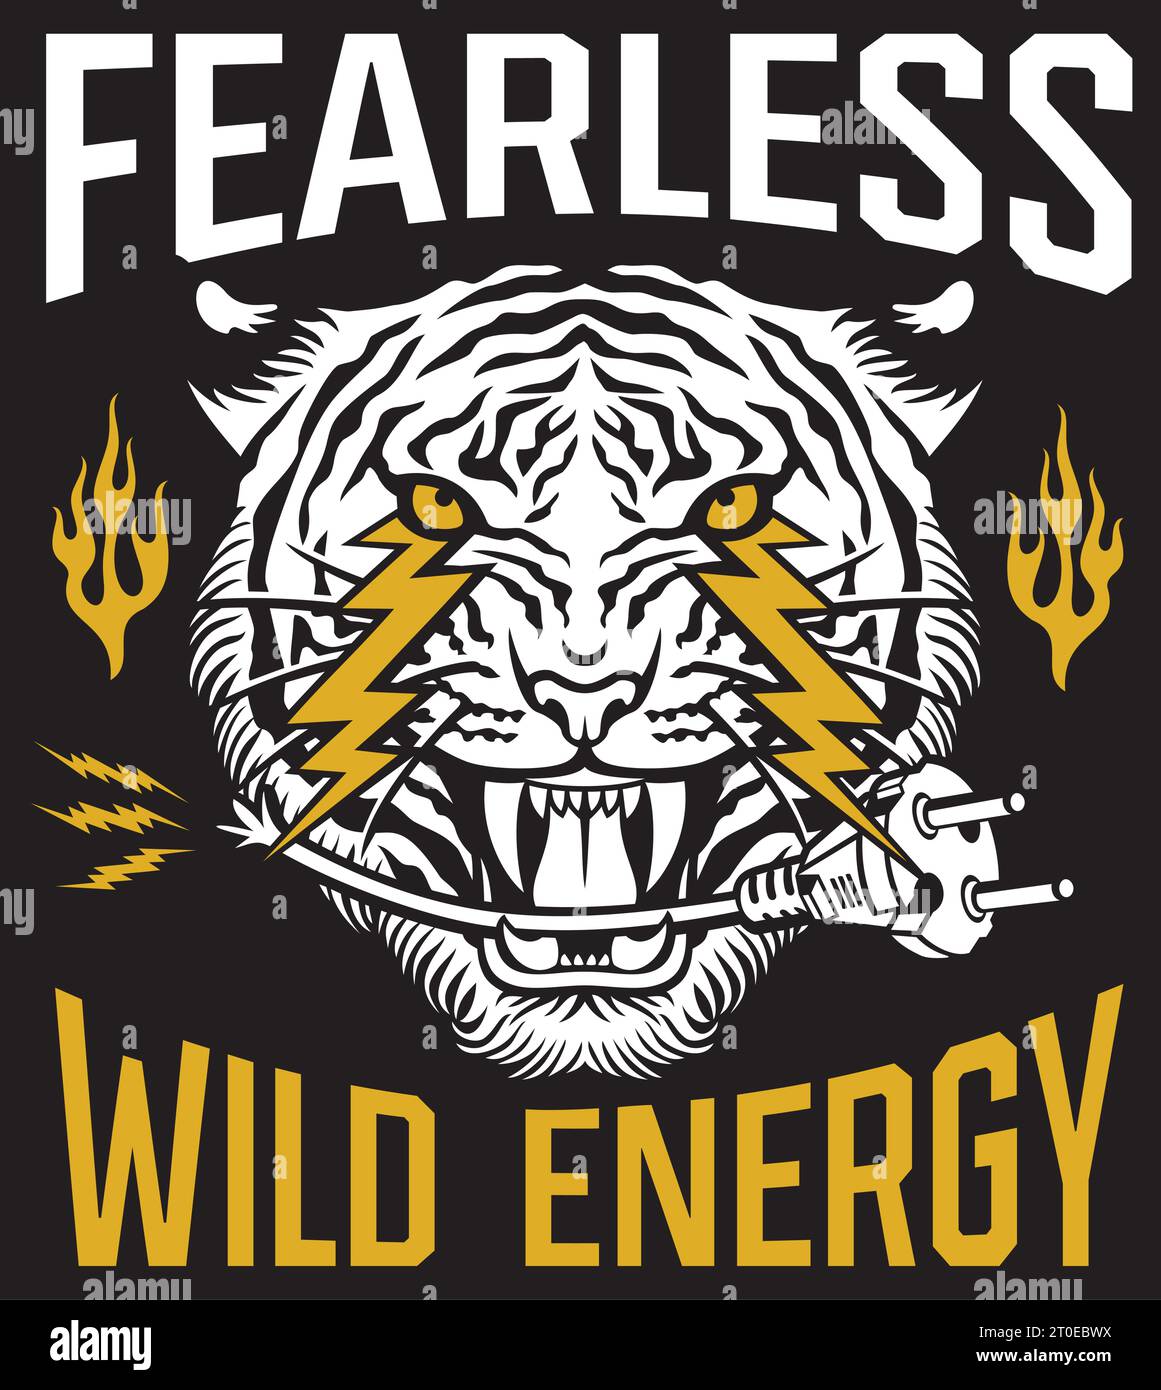 Fearless - Wild Energy Poster. Tiger Face with Lightning Bolts Color. Vector Illustration. Stock Vector